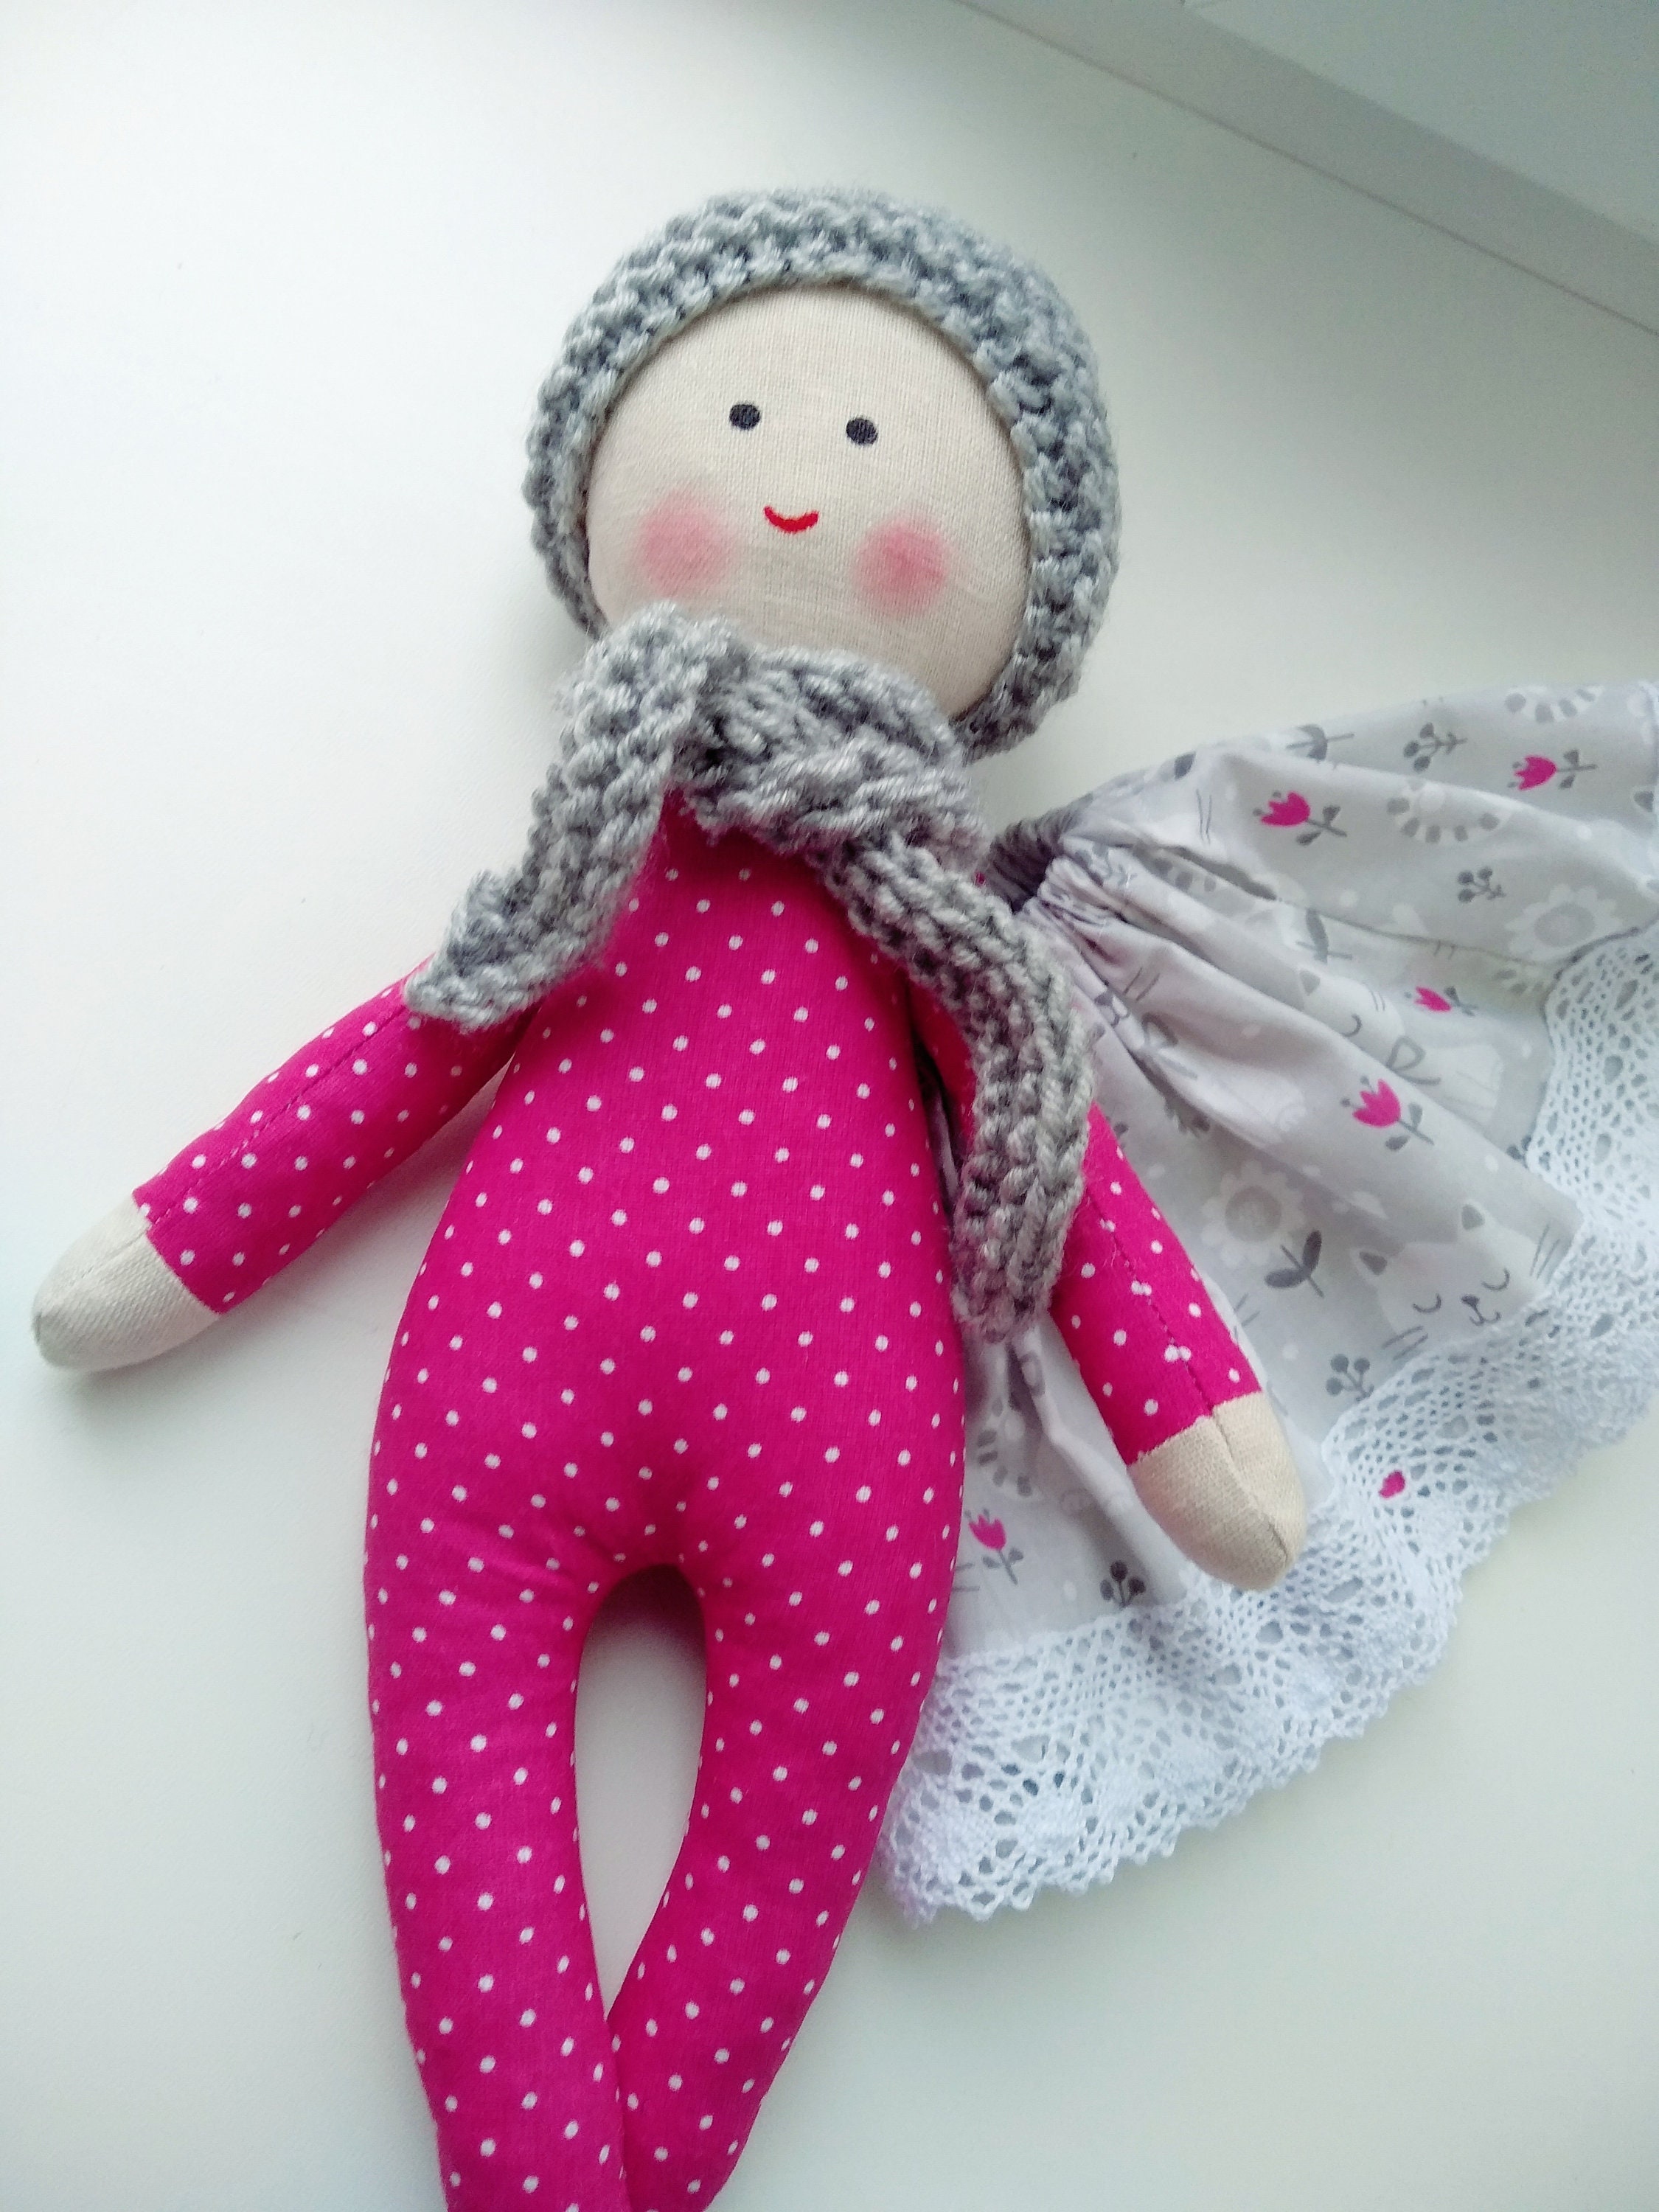 Baby's First Doll for Girl Rag Doll for Baby With Gray Hat | Etsy